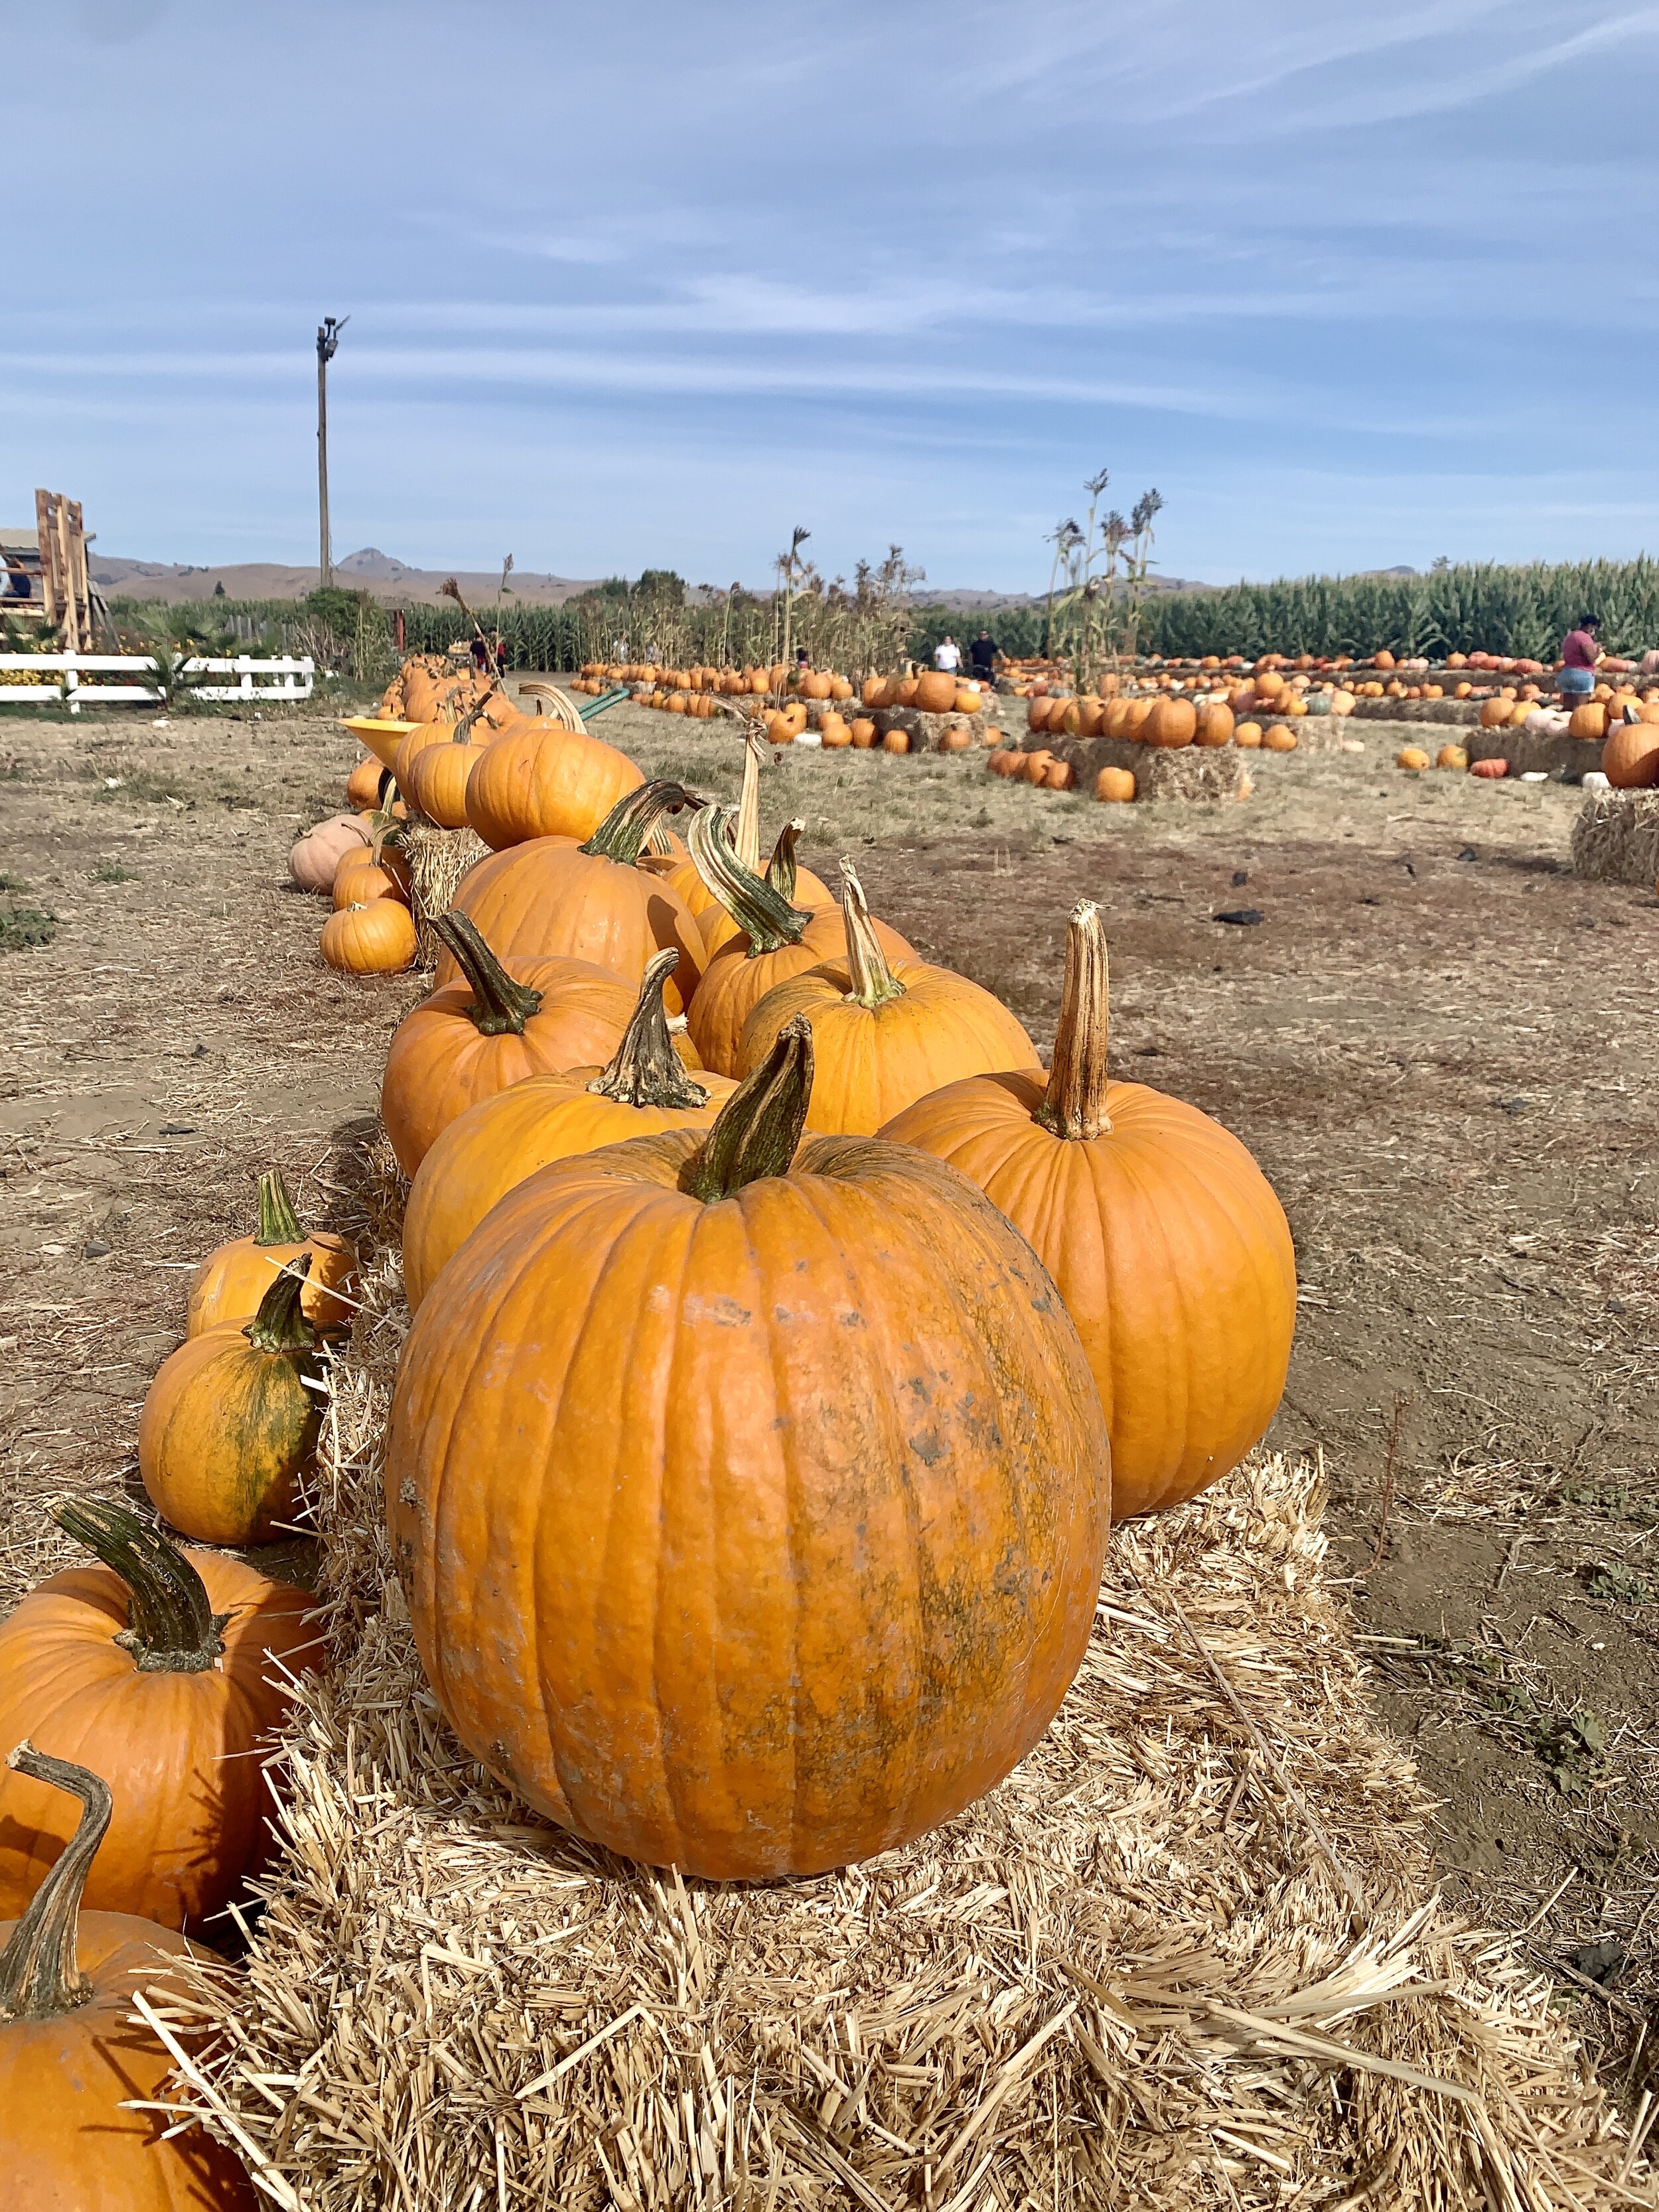 Swank Farms is the best pumpkin patch, sunflower fields and corn mazes near San Francisco and the Bay area. The perfect family day trip from San Francisco.JPG